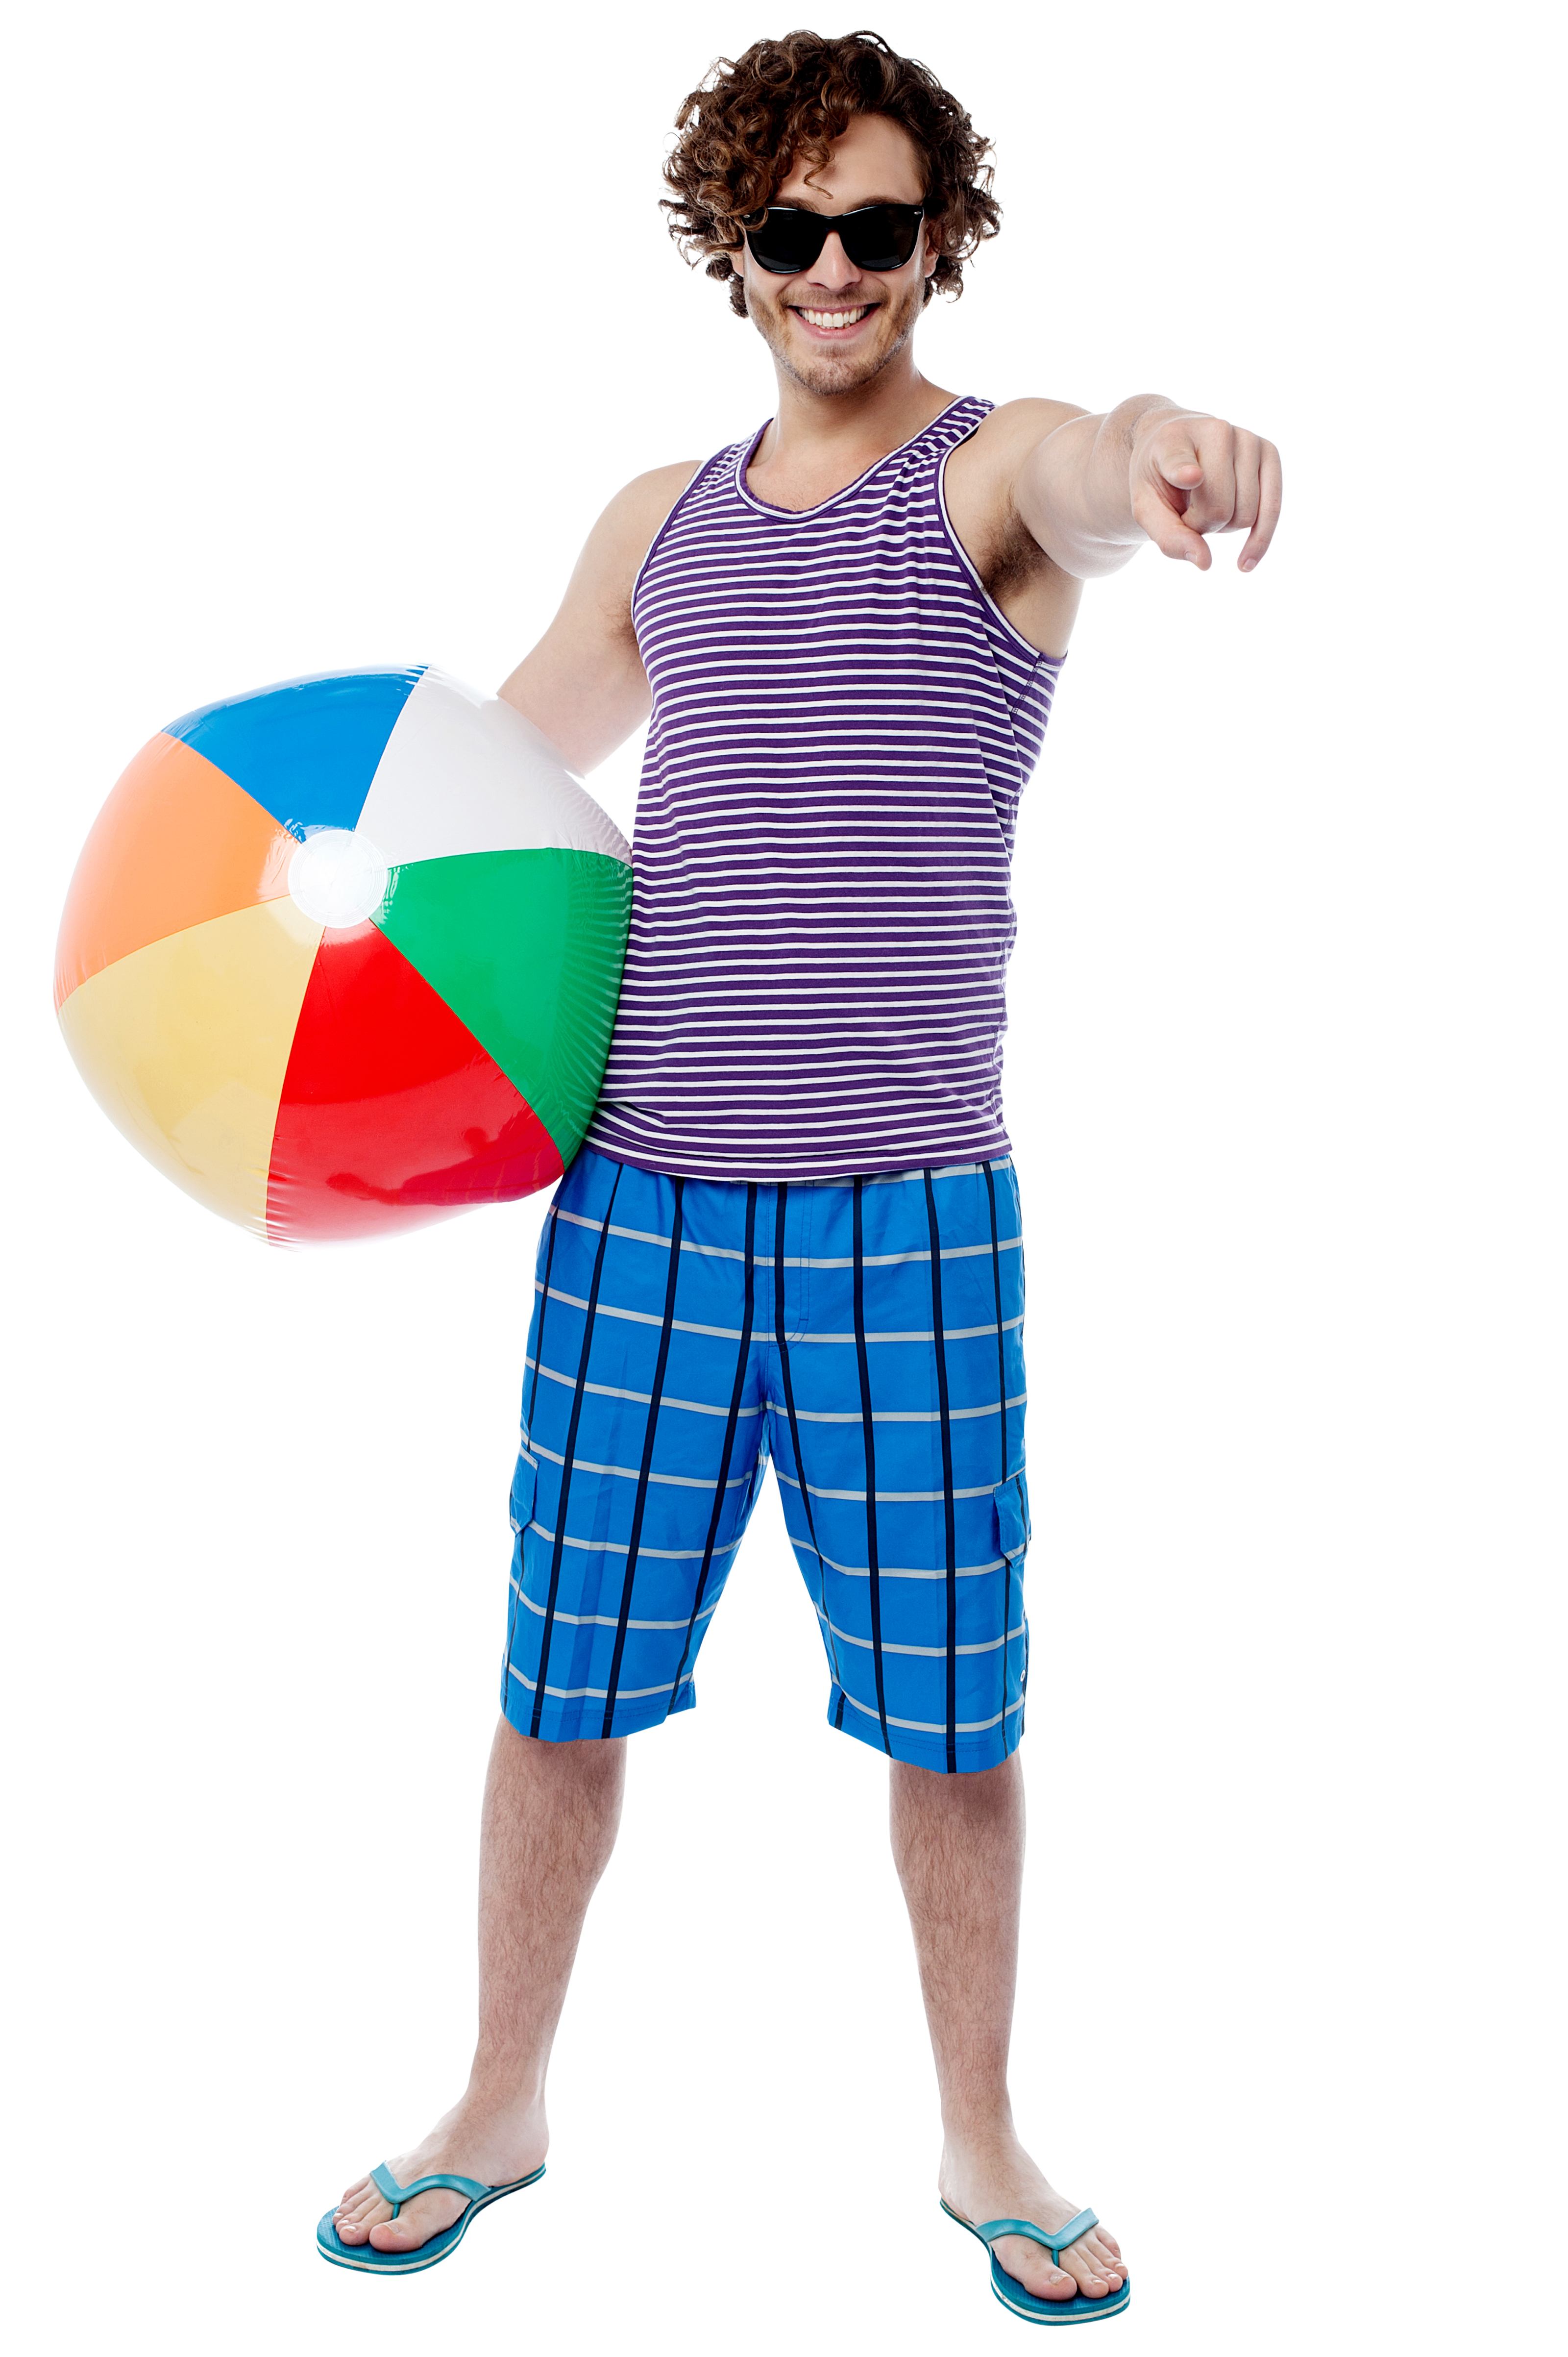 Men With Beach Ball PNG Image